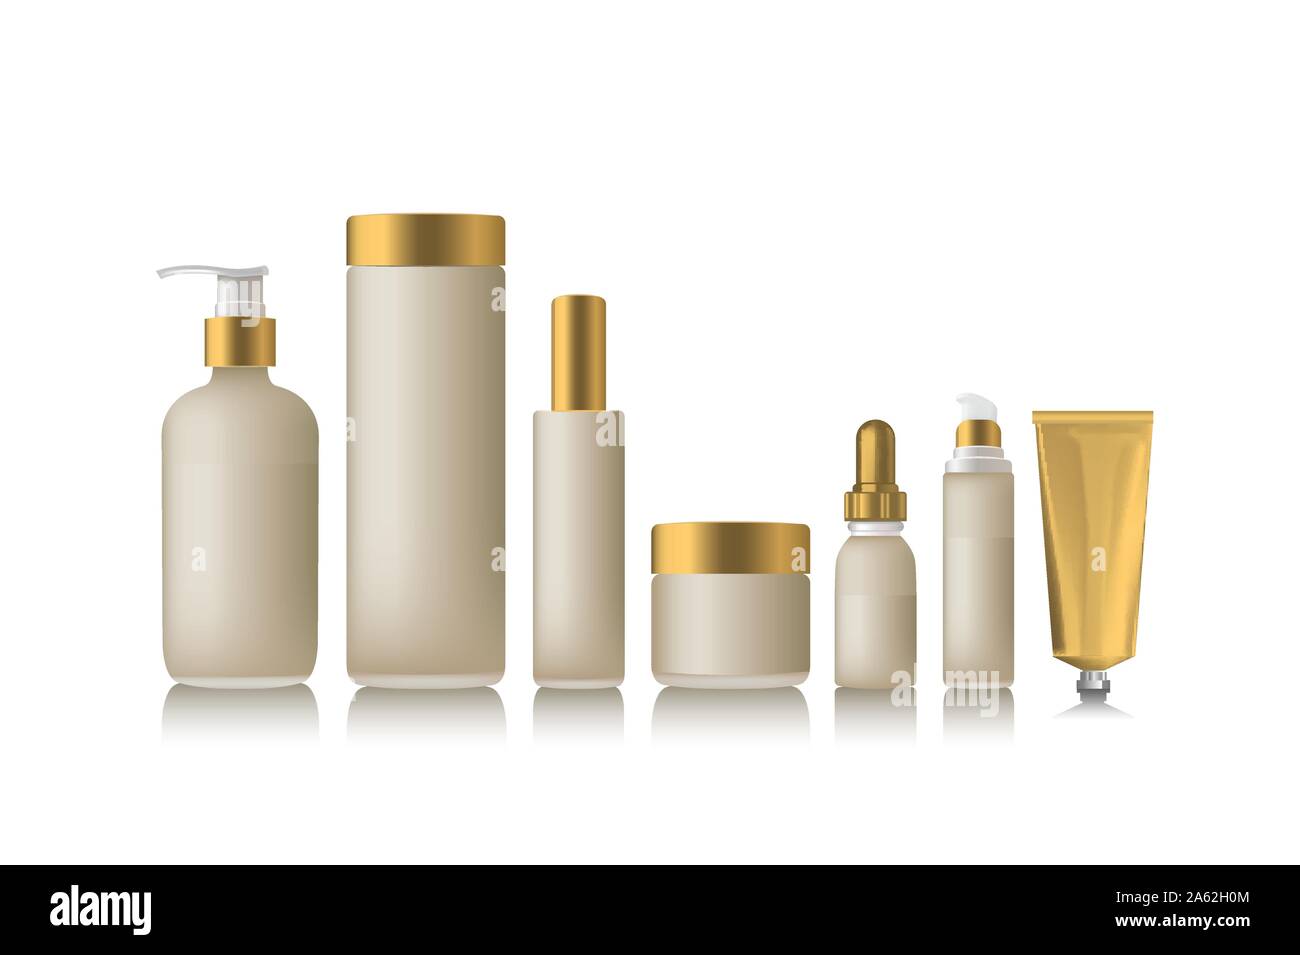 Realistic beige bottle for essential oil Stock Vector